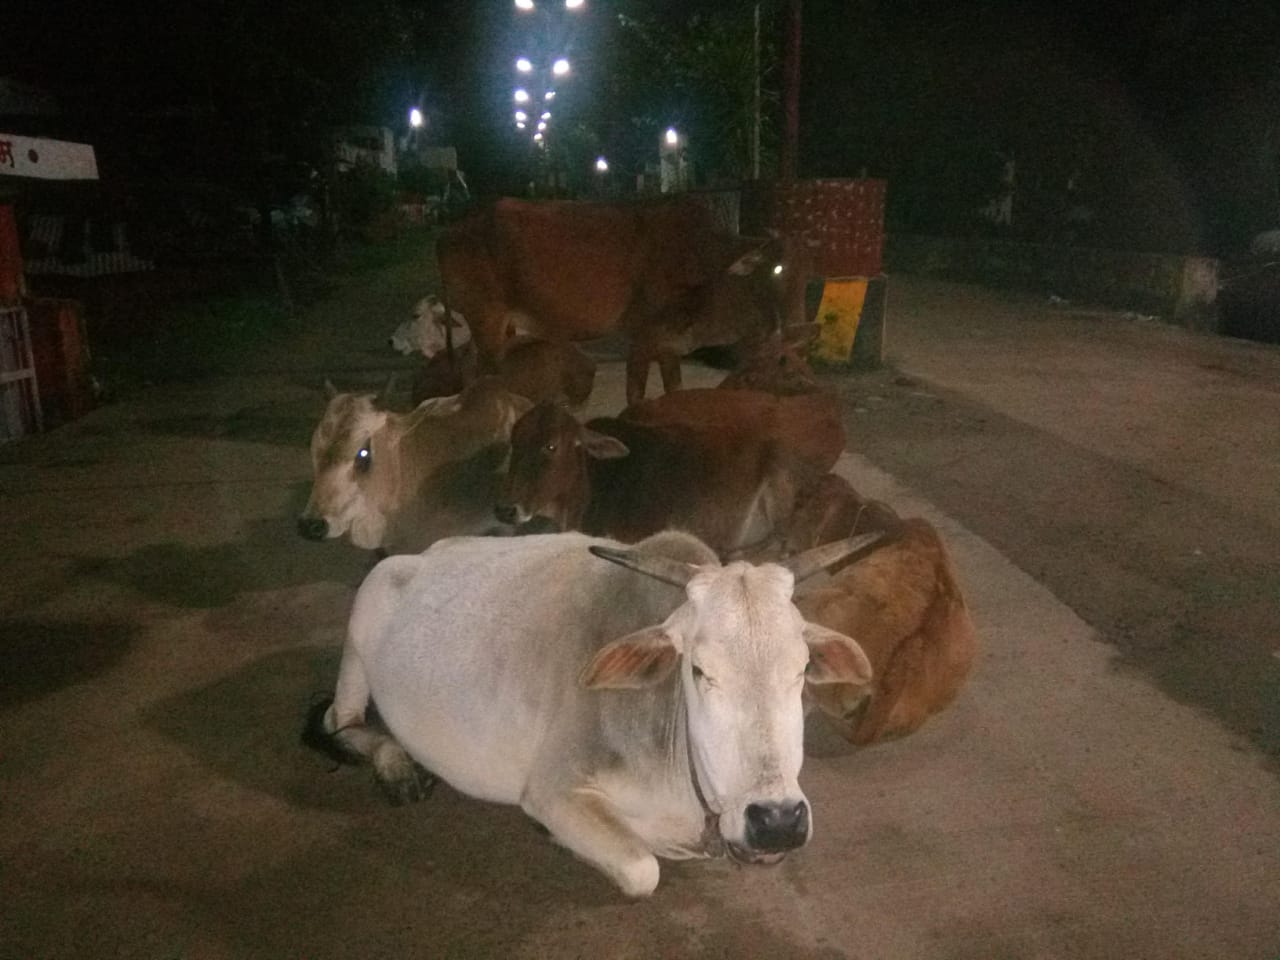 Cattle are seen on the streets instead of cowshed